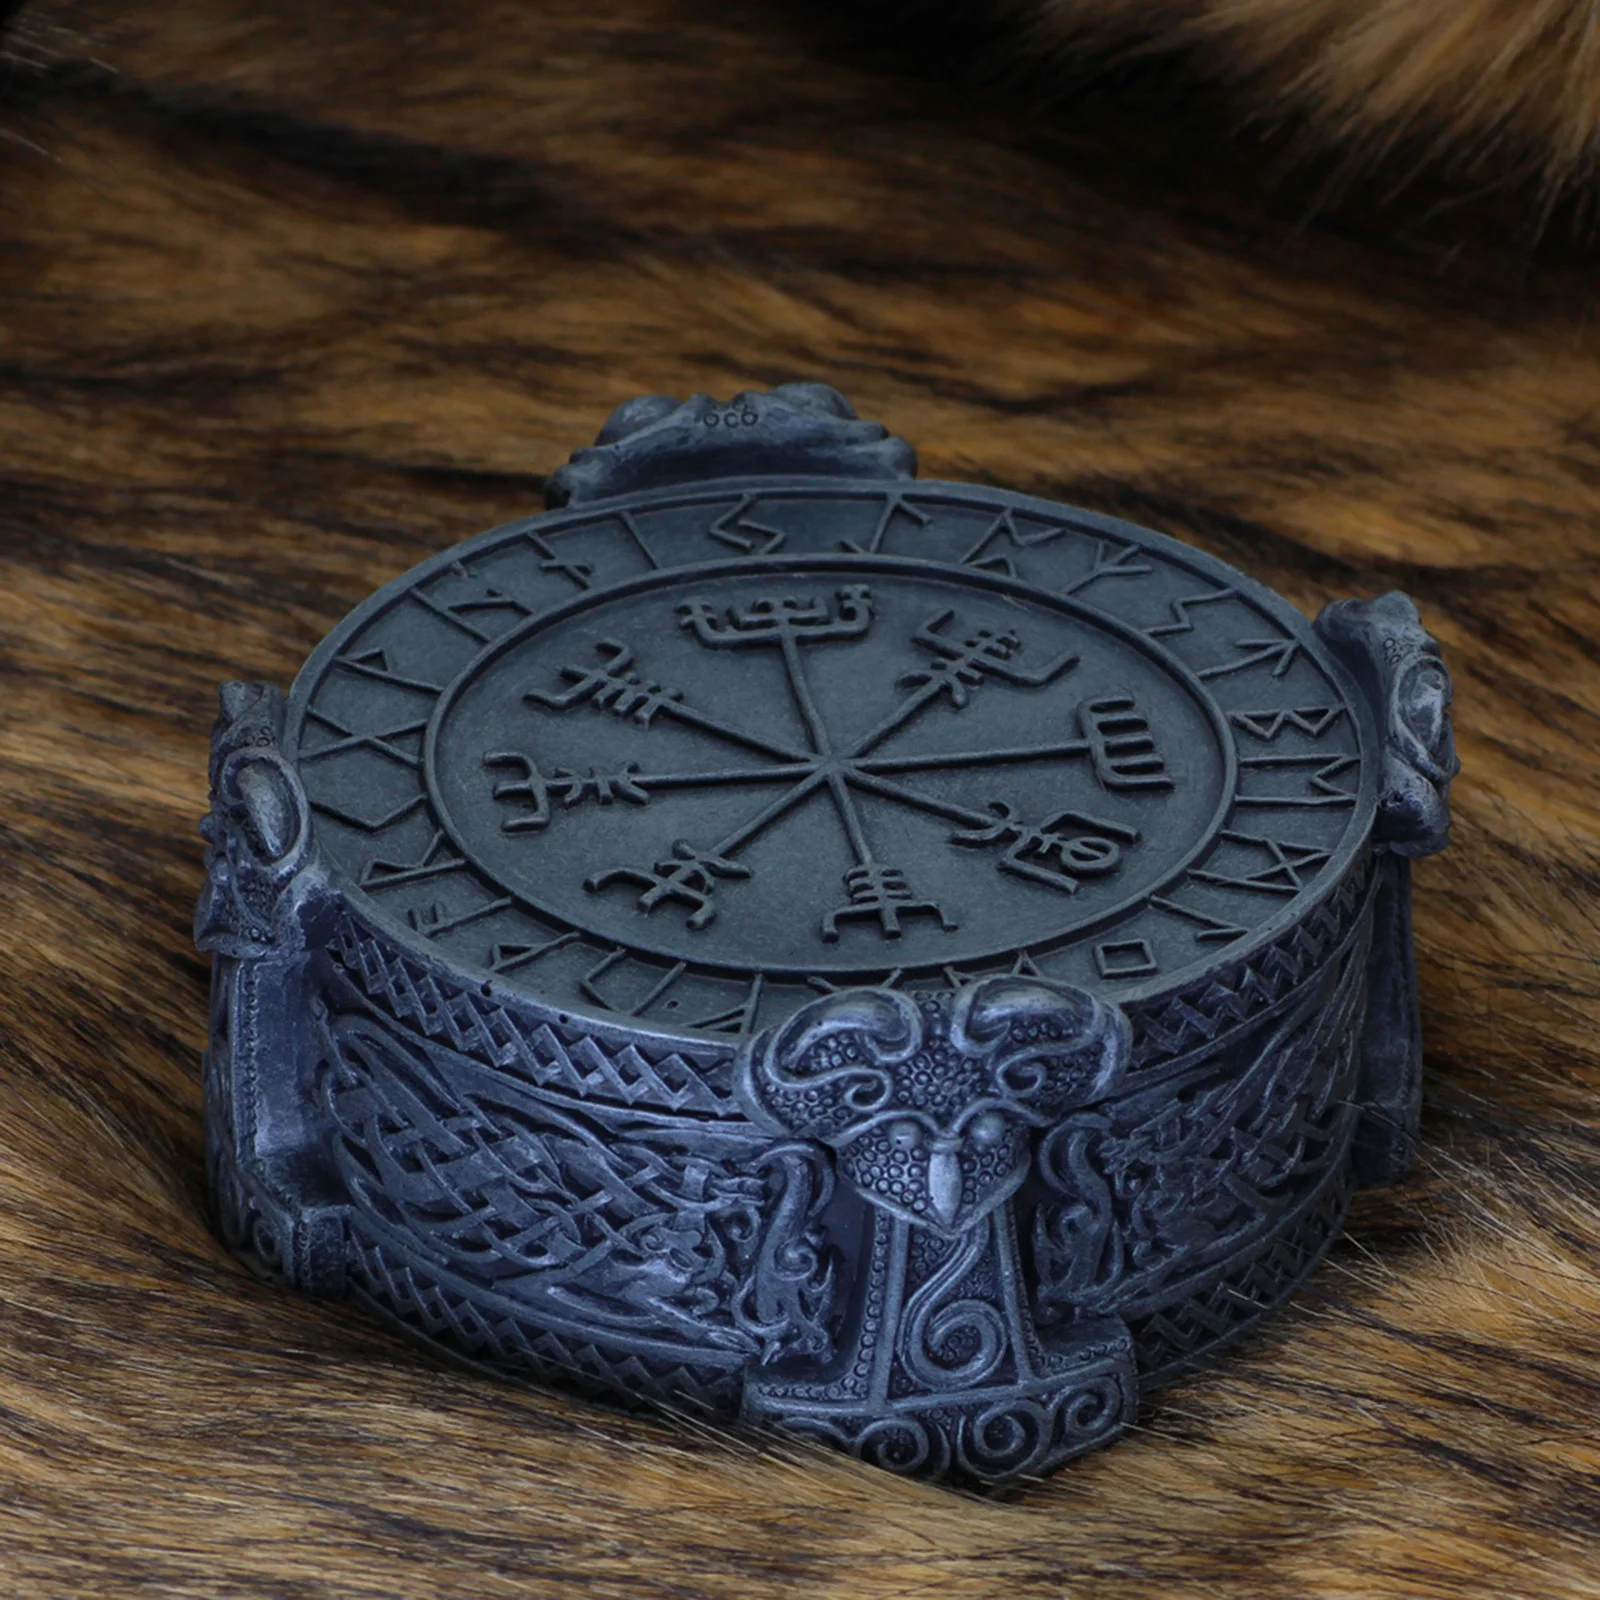 

Norse Viking Portable Jewelry Storage Box Knotwork Hammer for Adornment Collectible Figurine Birthday Gift Home Decor Rings